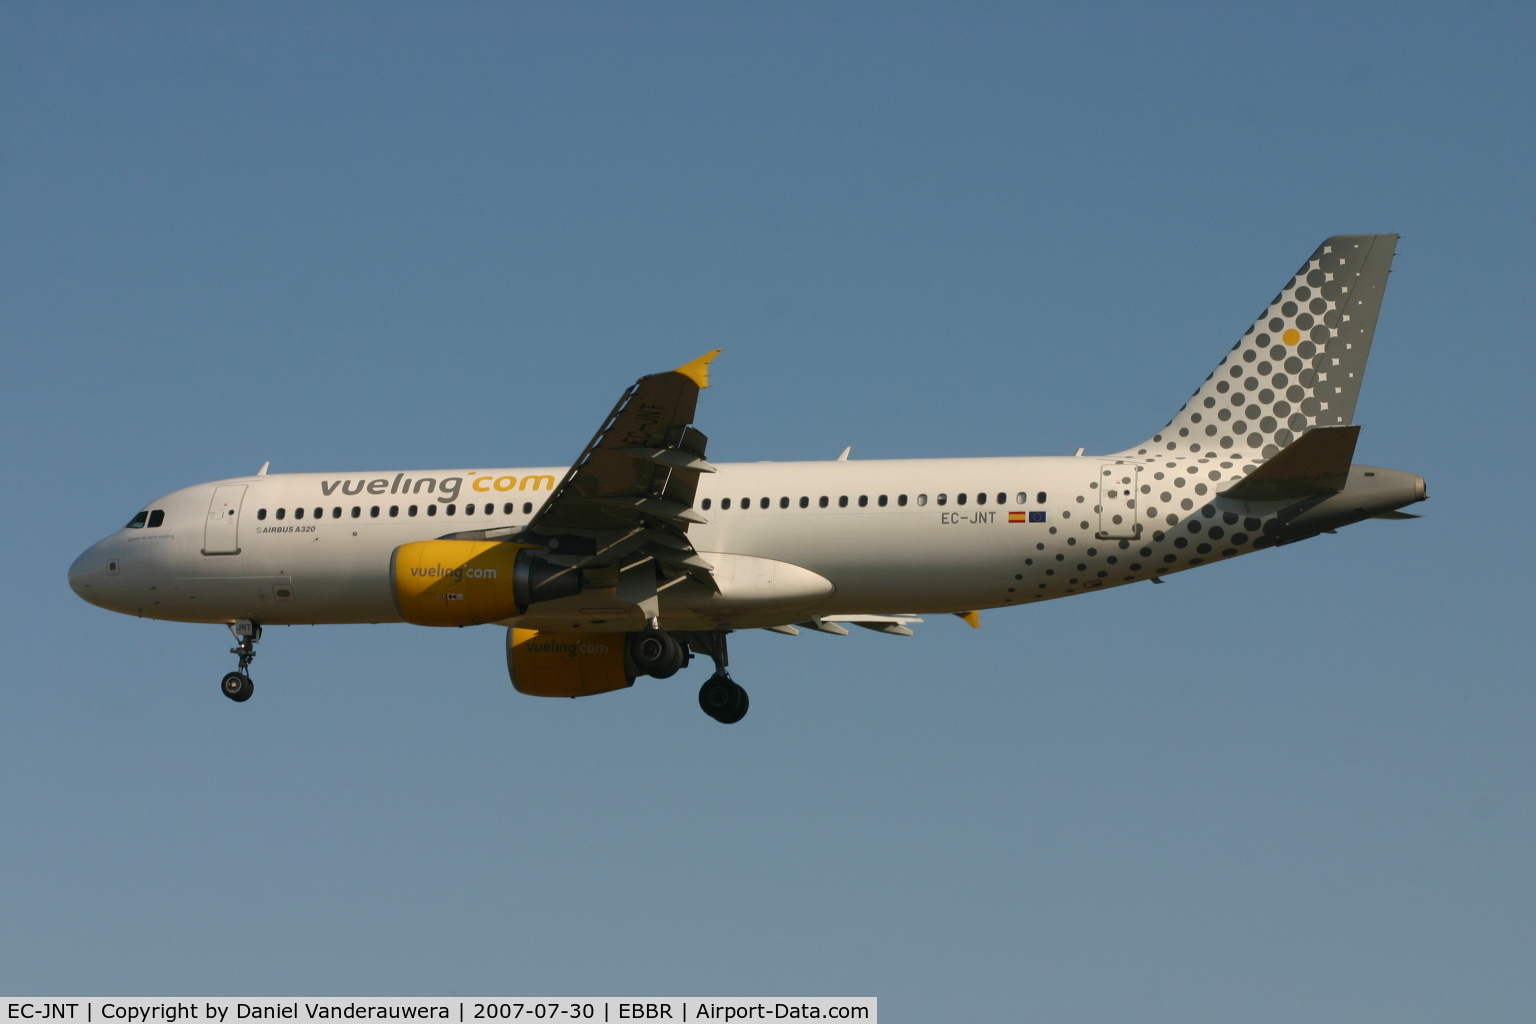 EC-JNT, 2005 Airbus A320-214 C/N 2623, arrival of flight VY5210 to rwy 25L